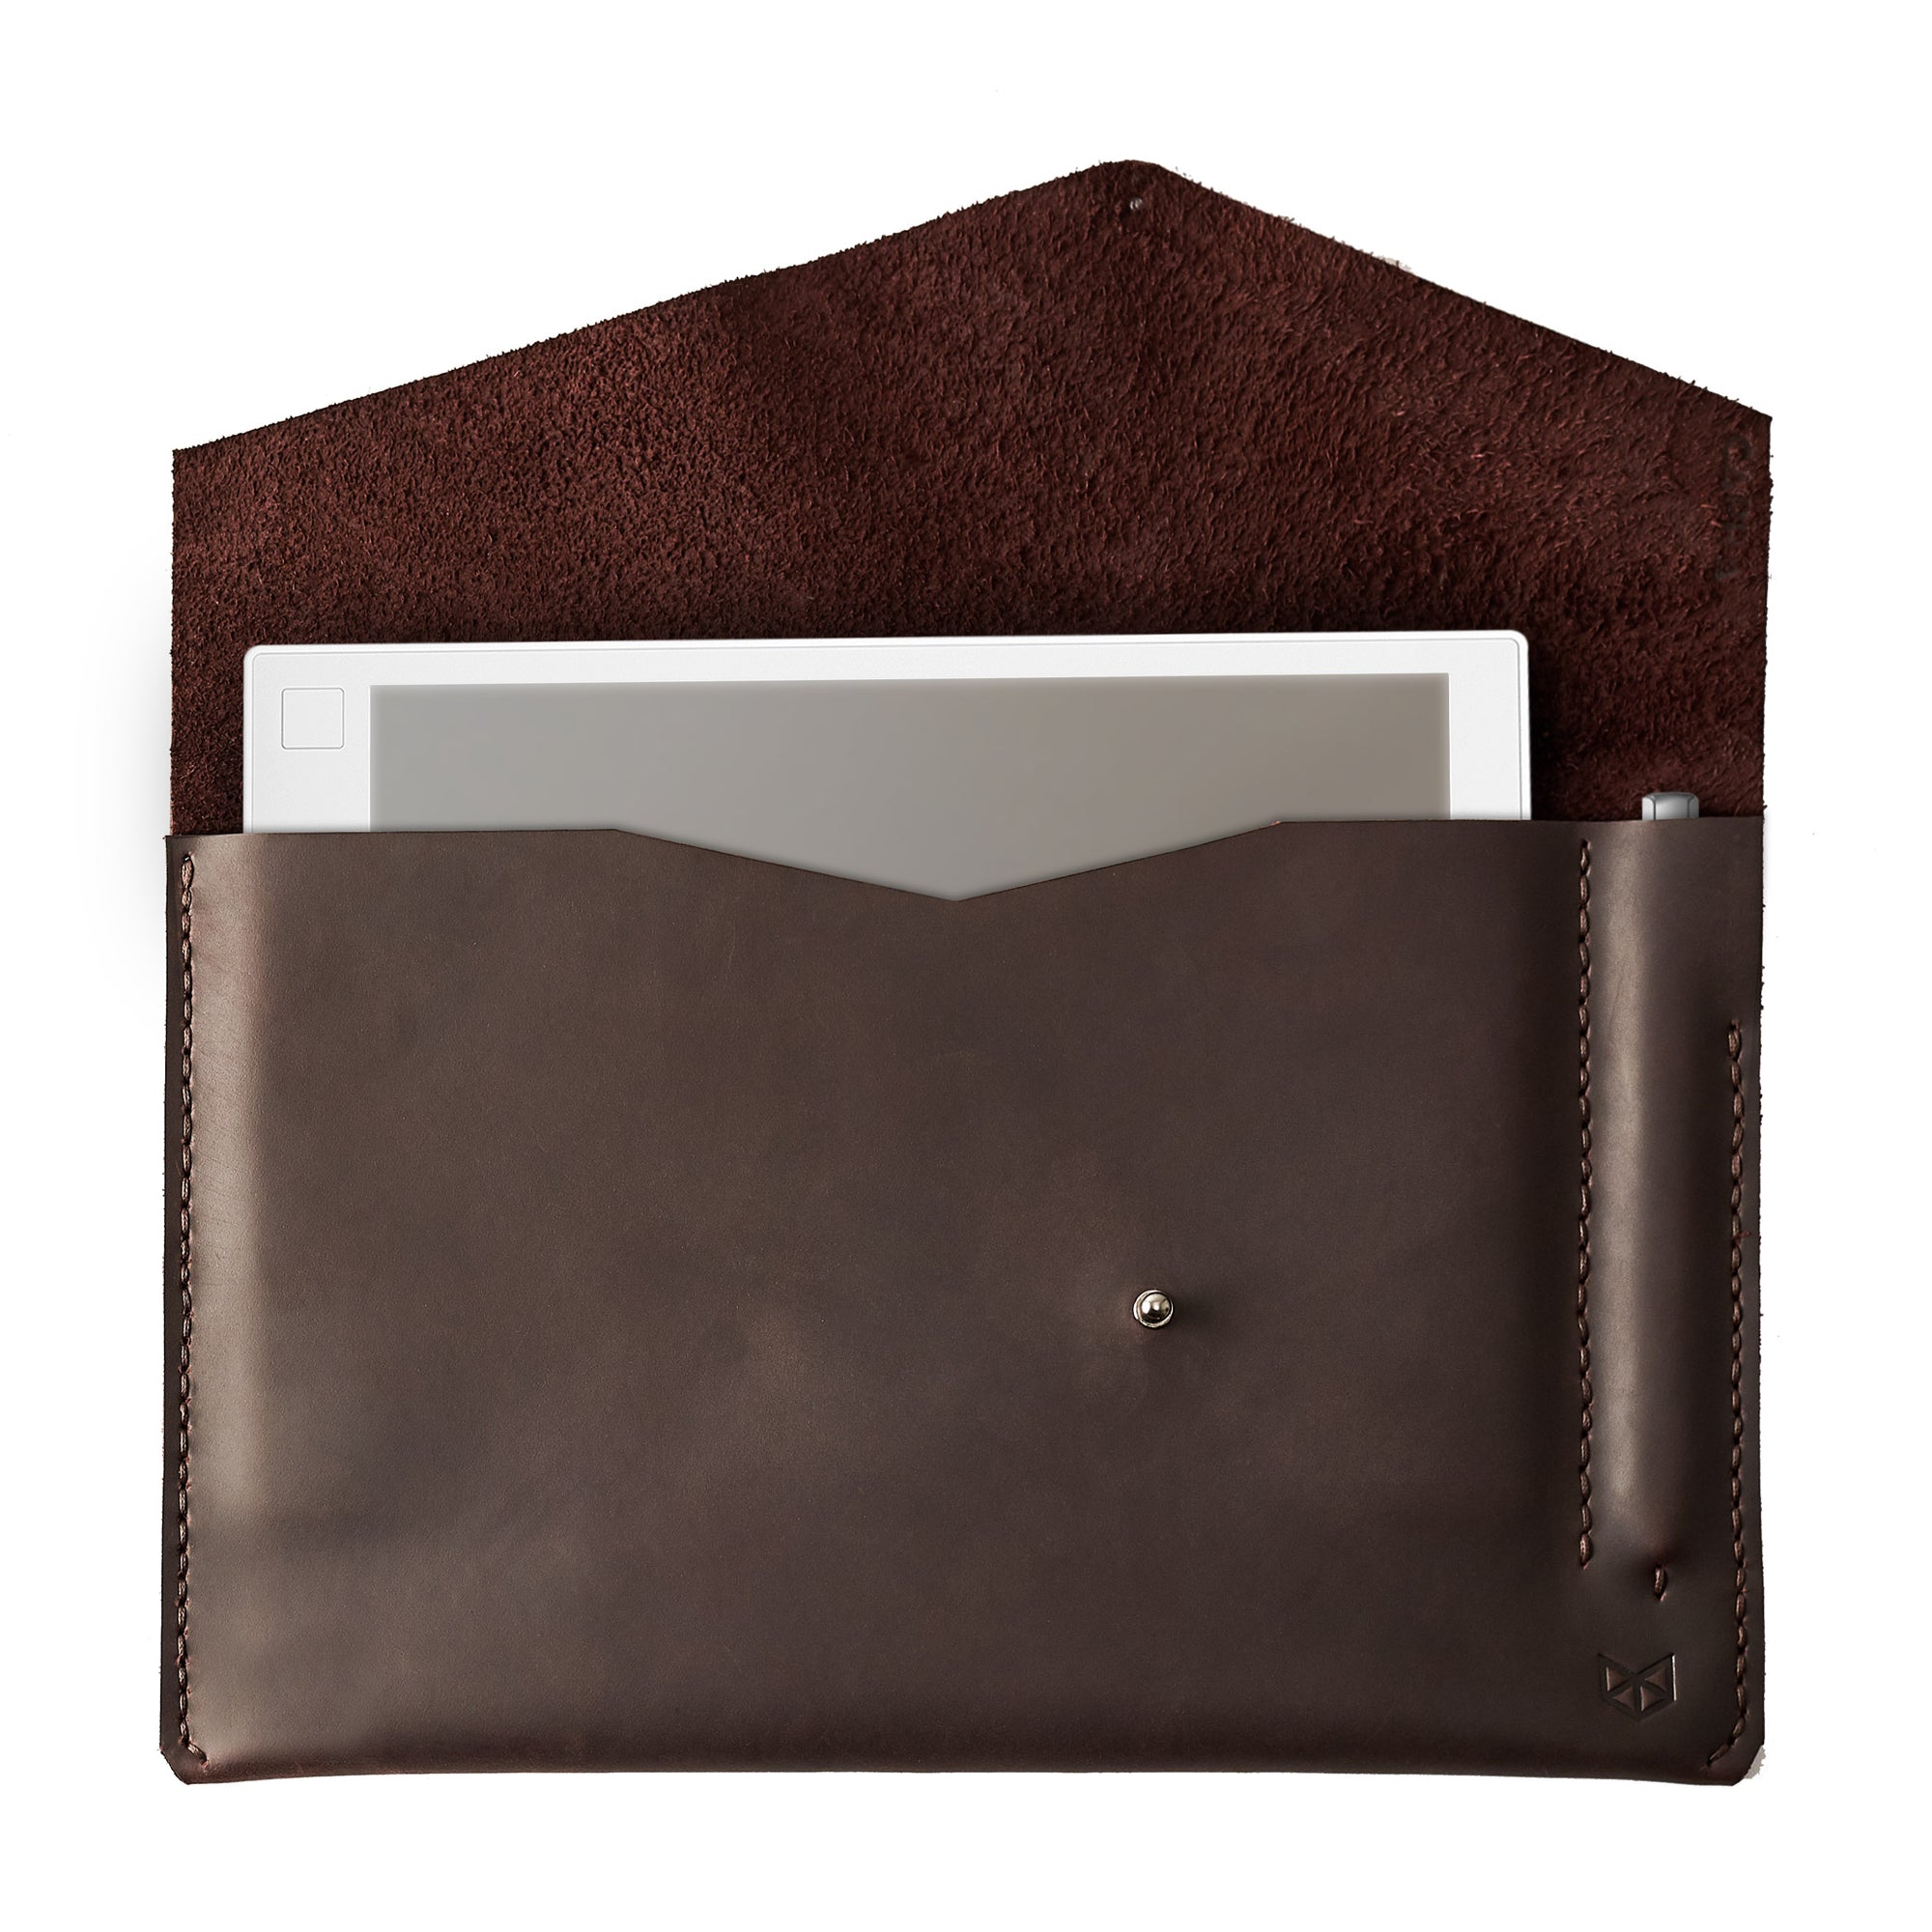 Cover. Dark brown handcrafted leather reMarkable tablet case. Folio with Marker holder. Paper E-ink tablet minimalist sleeve design. 